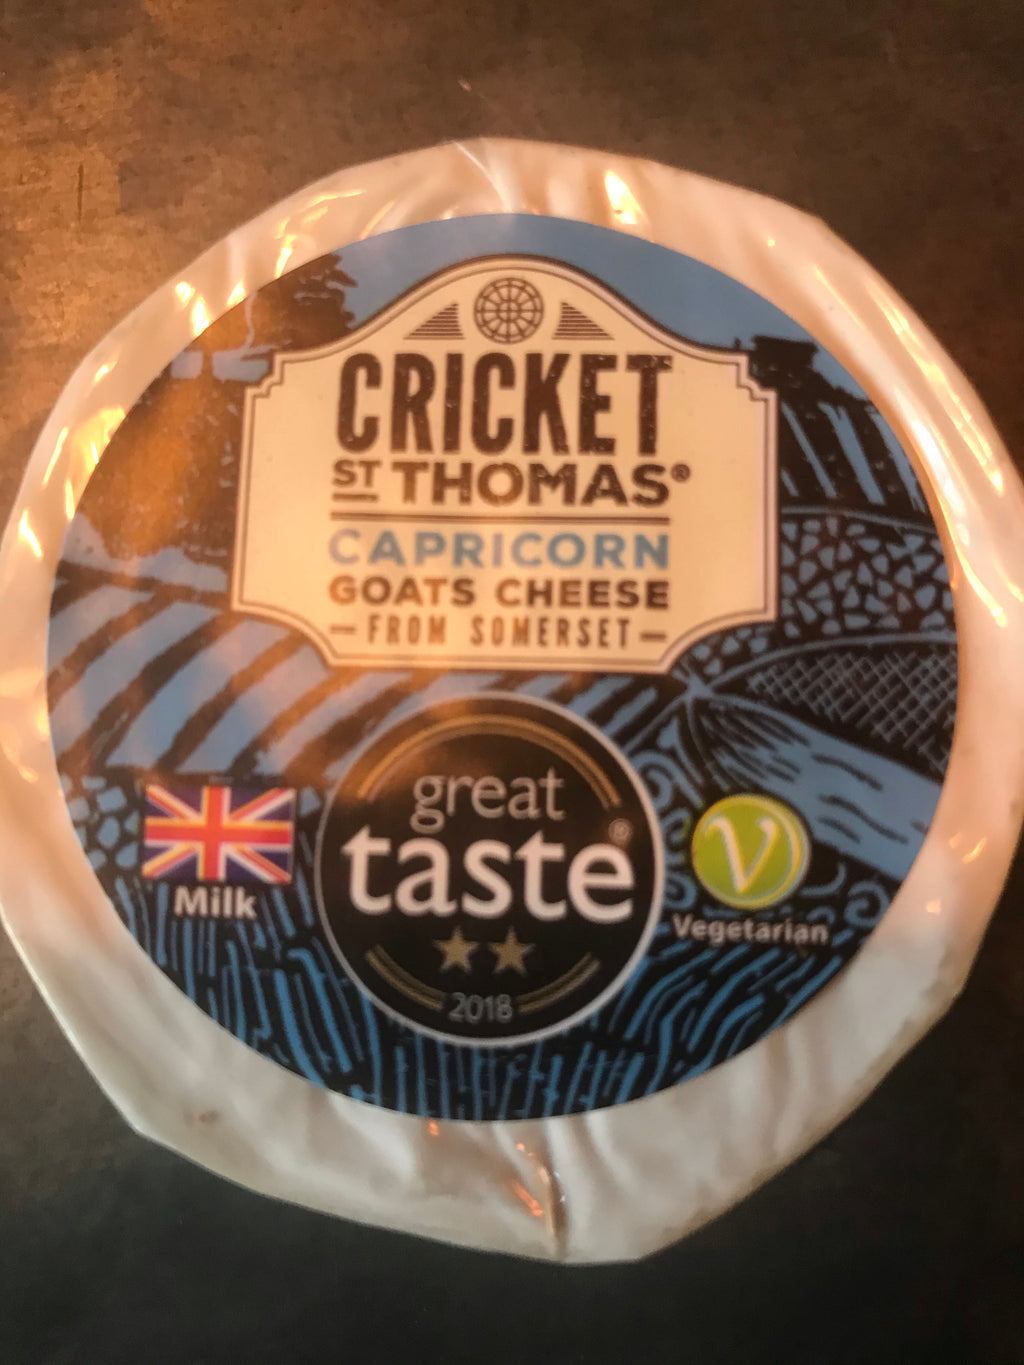 Cricket St Thomas Goats Cheese from Somerset 100g £3.25